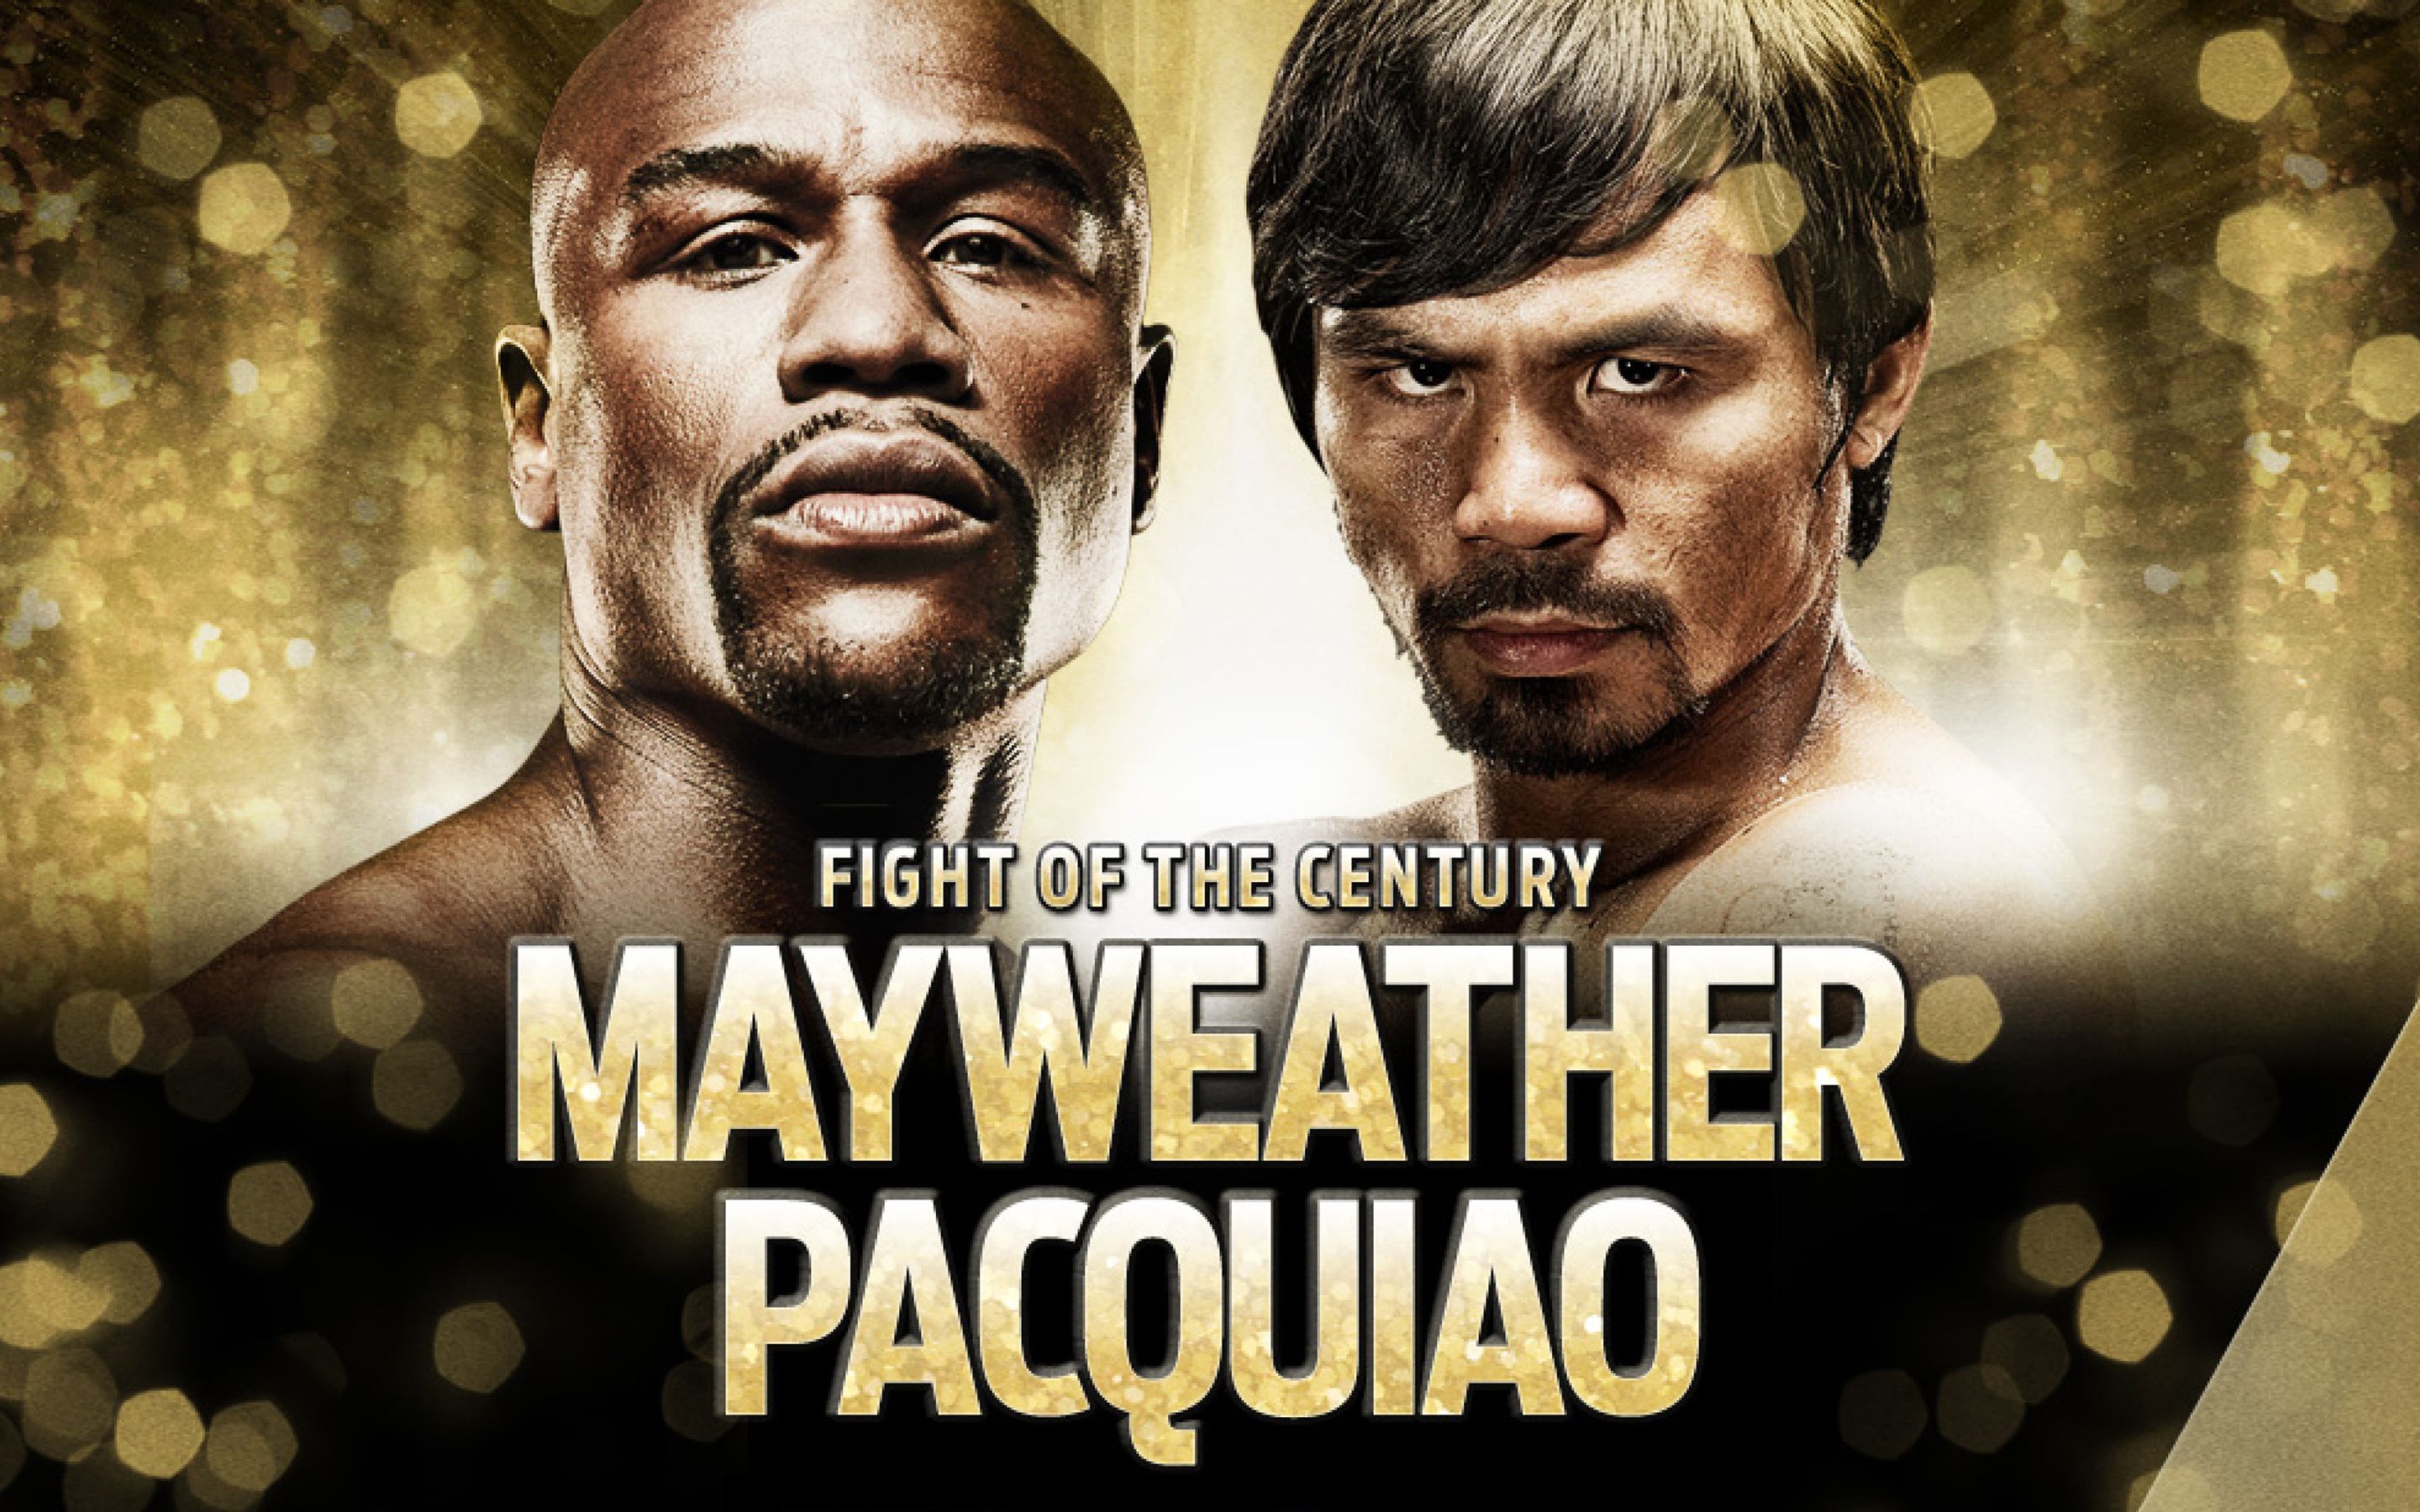 Manny-Pacquiao-vs-Floyd-Mayweather-2015-Fight-of-the-Century-Wallpaper.jpg